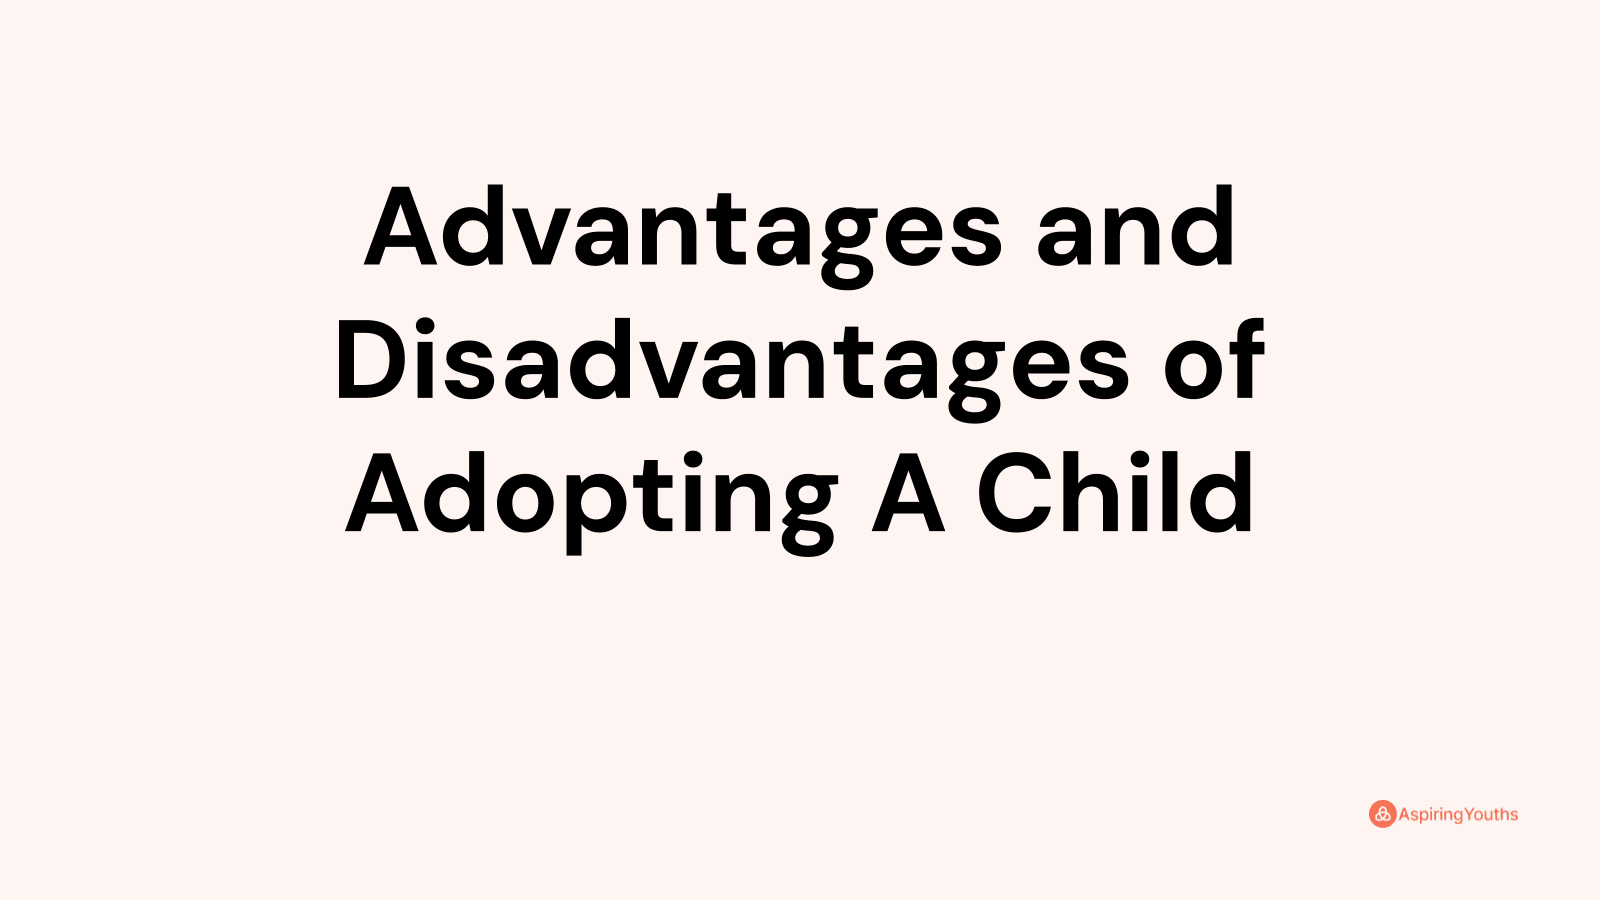 Advantages and disadvantages of Adopting A Child